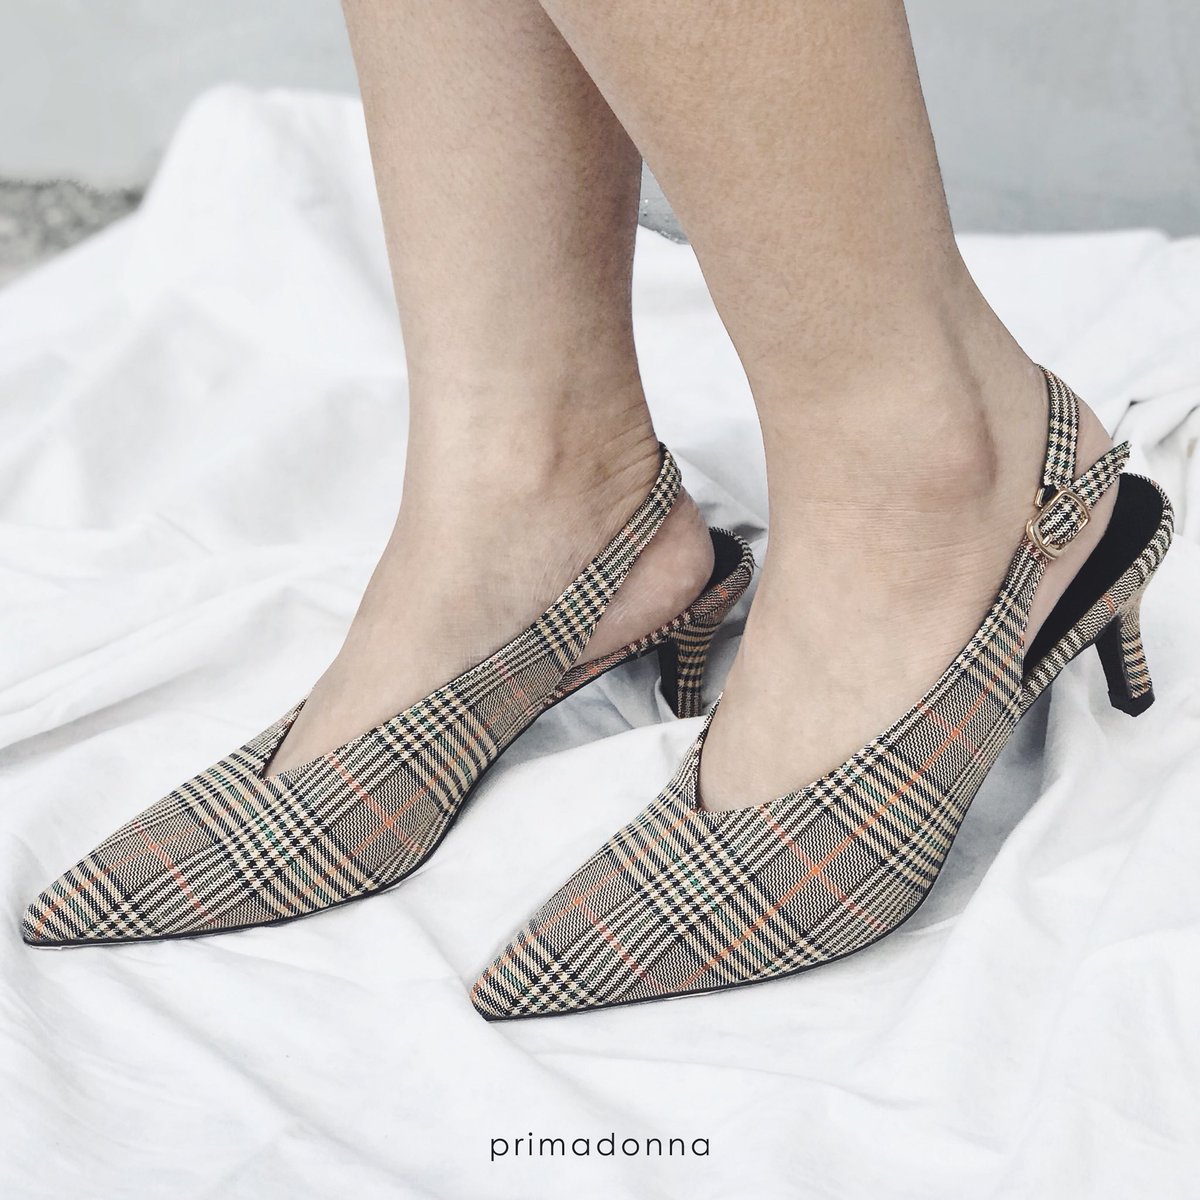 Primadonna Shoes On Twitter Dinner Out With Your Gals Choose